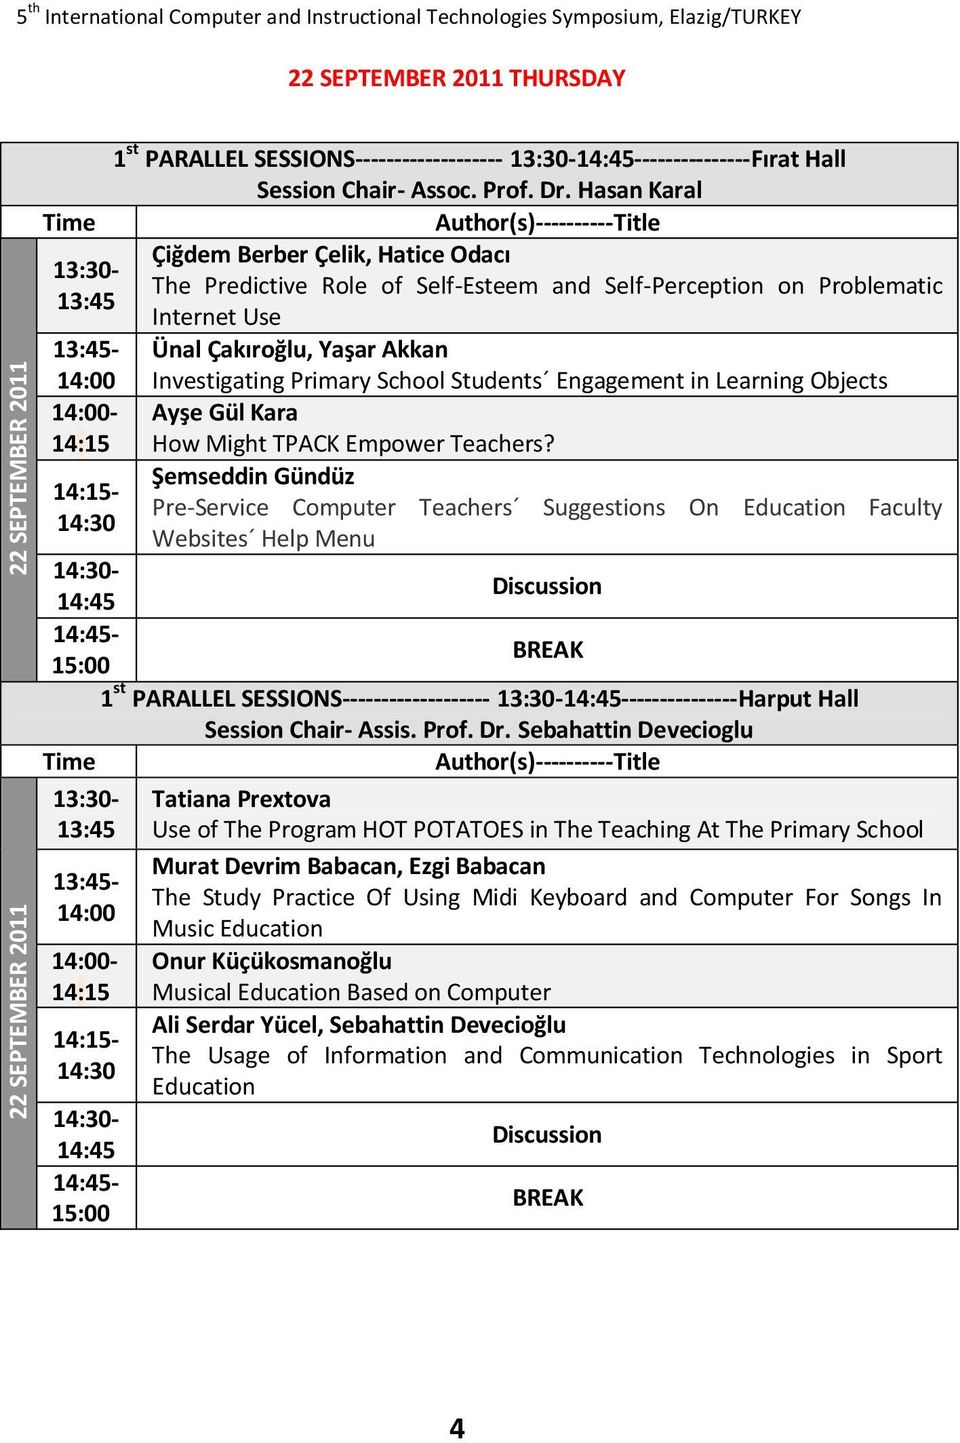 Primary School Students Engagement in Learning Objects 14:00- Ayşe Gül Kara 14:15 How Might TPACK Empower Teachers?